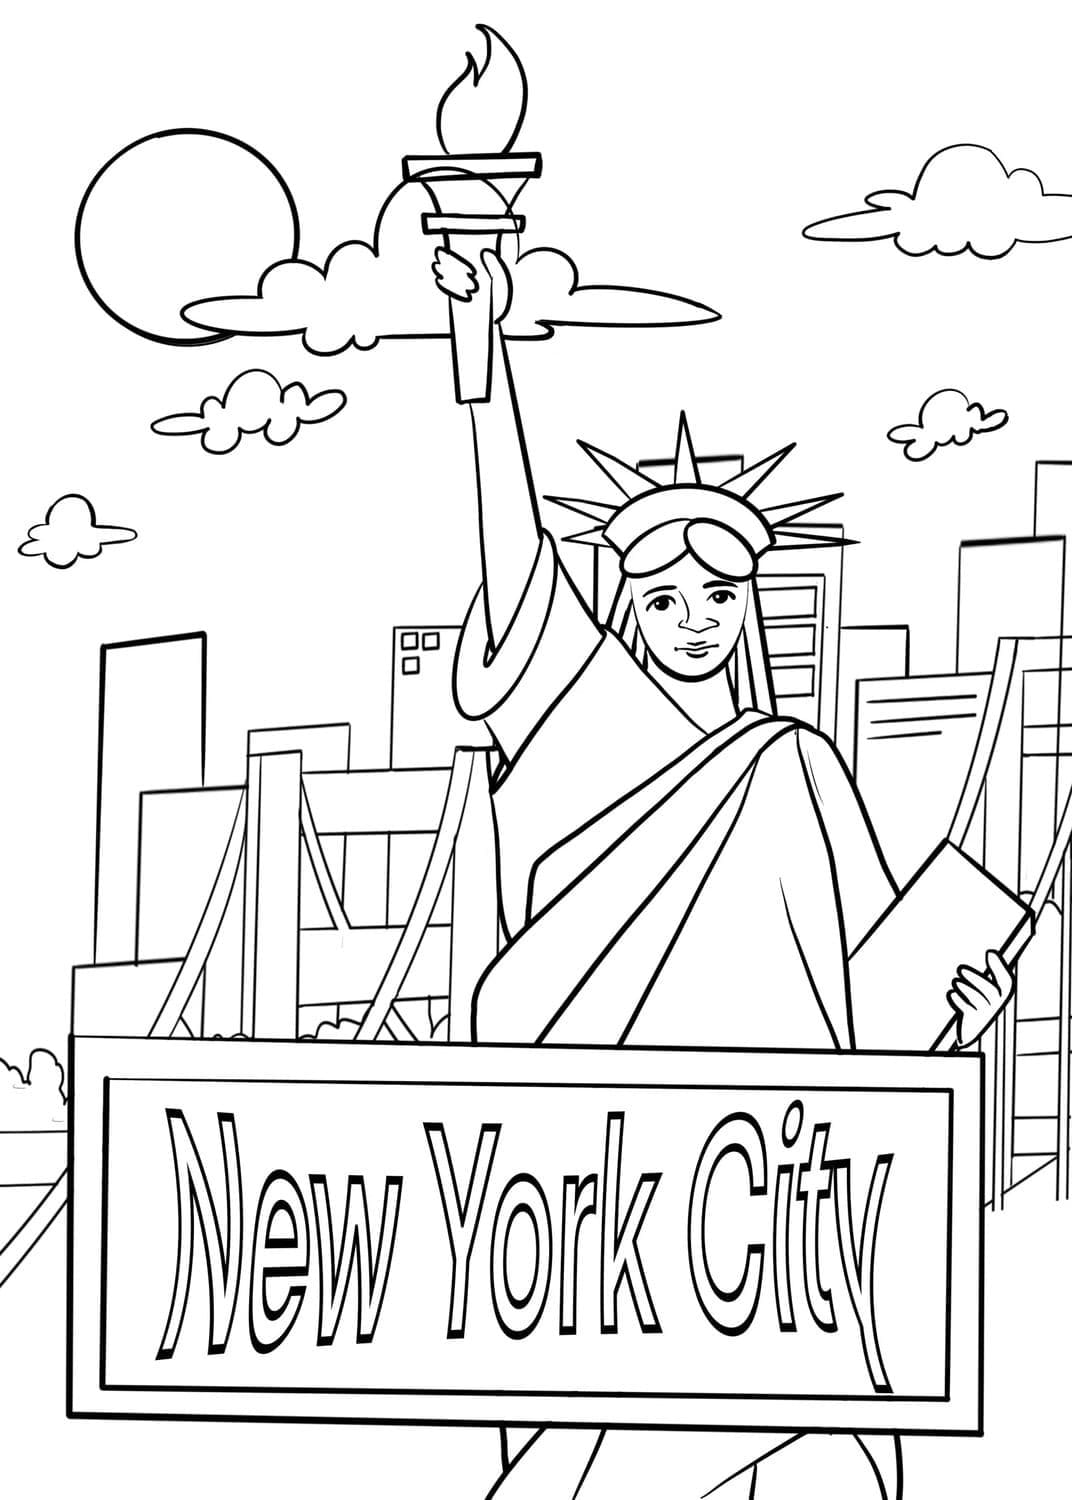 New York City Free Printable coloring page - Download, Print or Color ...